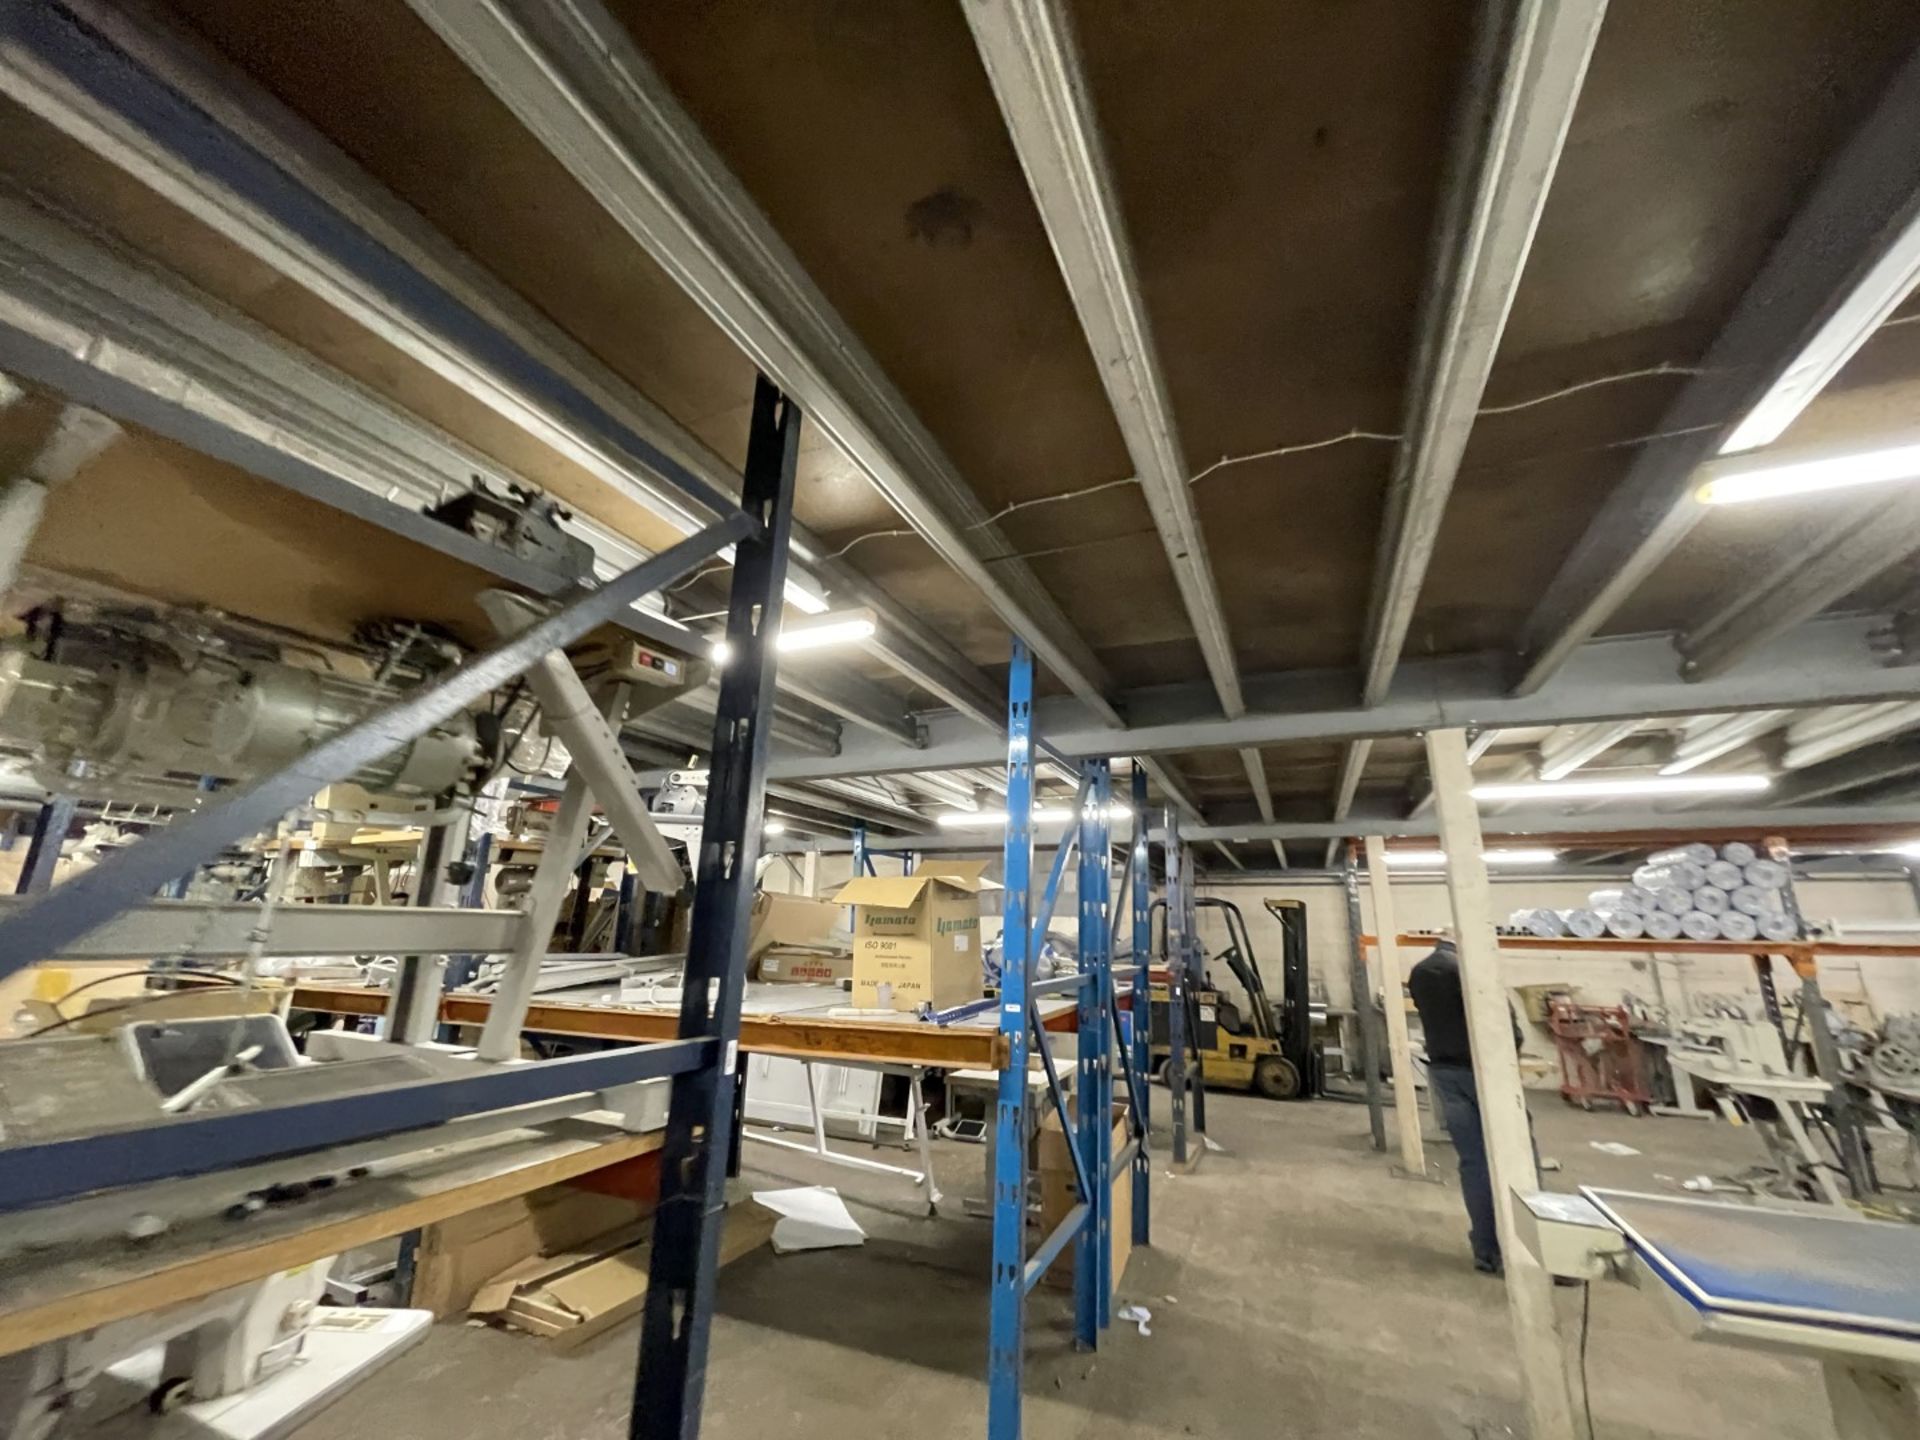 1 x Warehouse Mezzanine Floor With Floor Boards, Lights and Wooden Staircase - Approx Size: 16 x 16m - Image 19 of 30